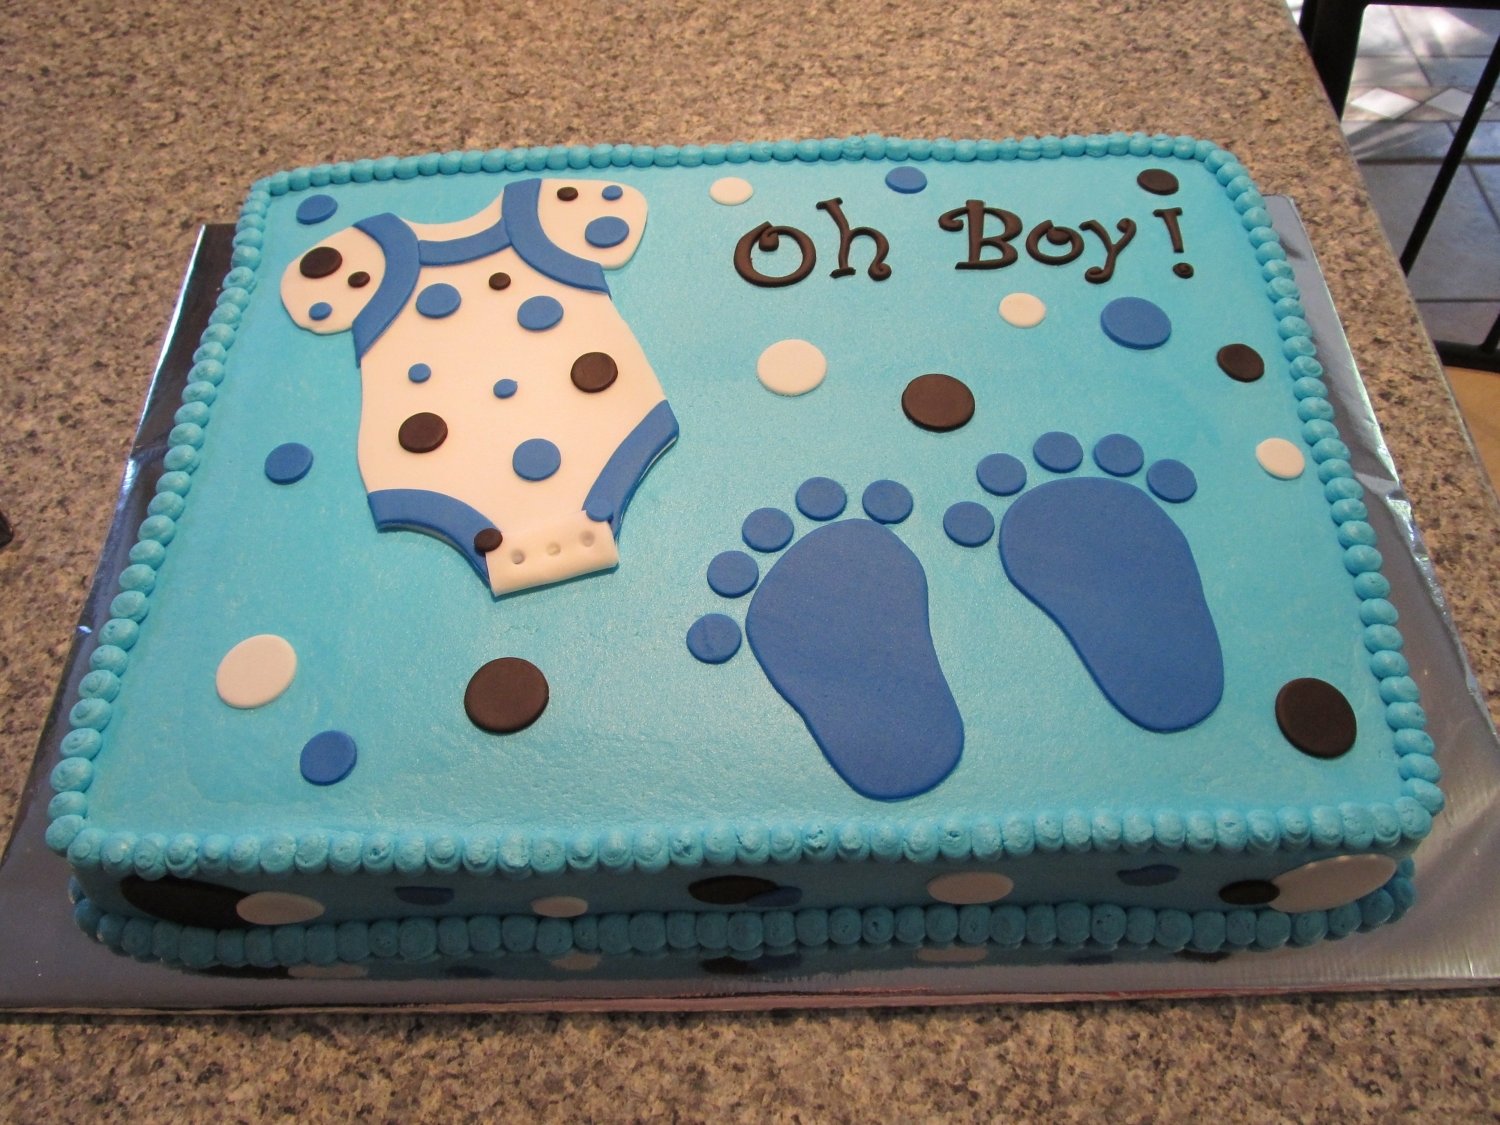 10 Awesome Baby Boy Shower Cake Ideas baby shower cake designs for boy ideas and girl decorations sports 1 2022